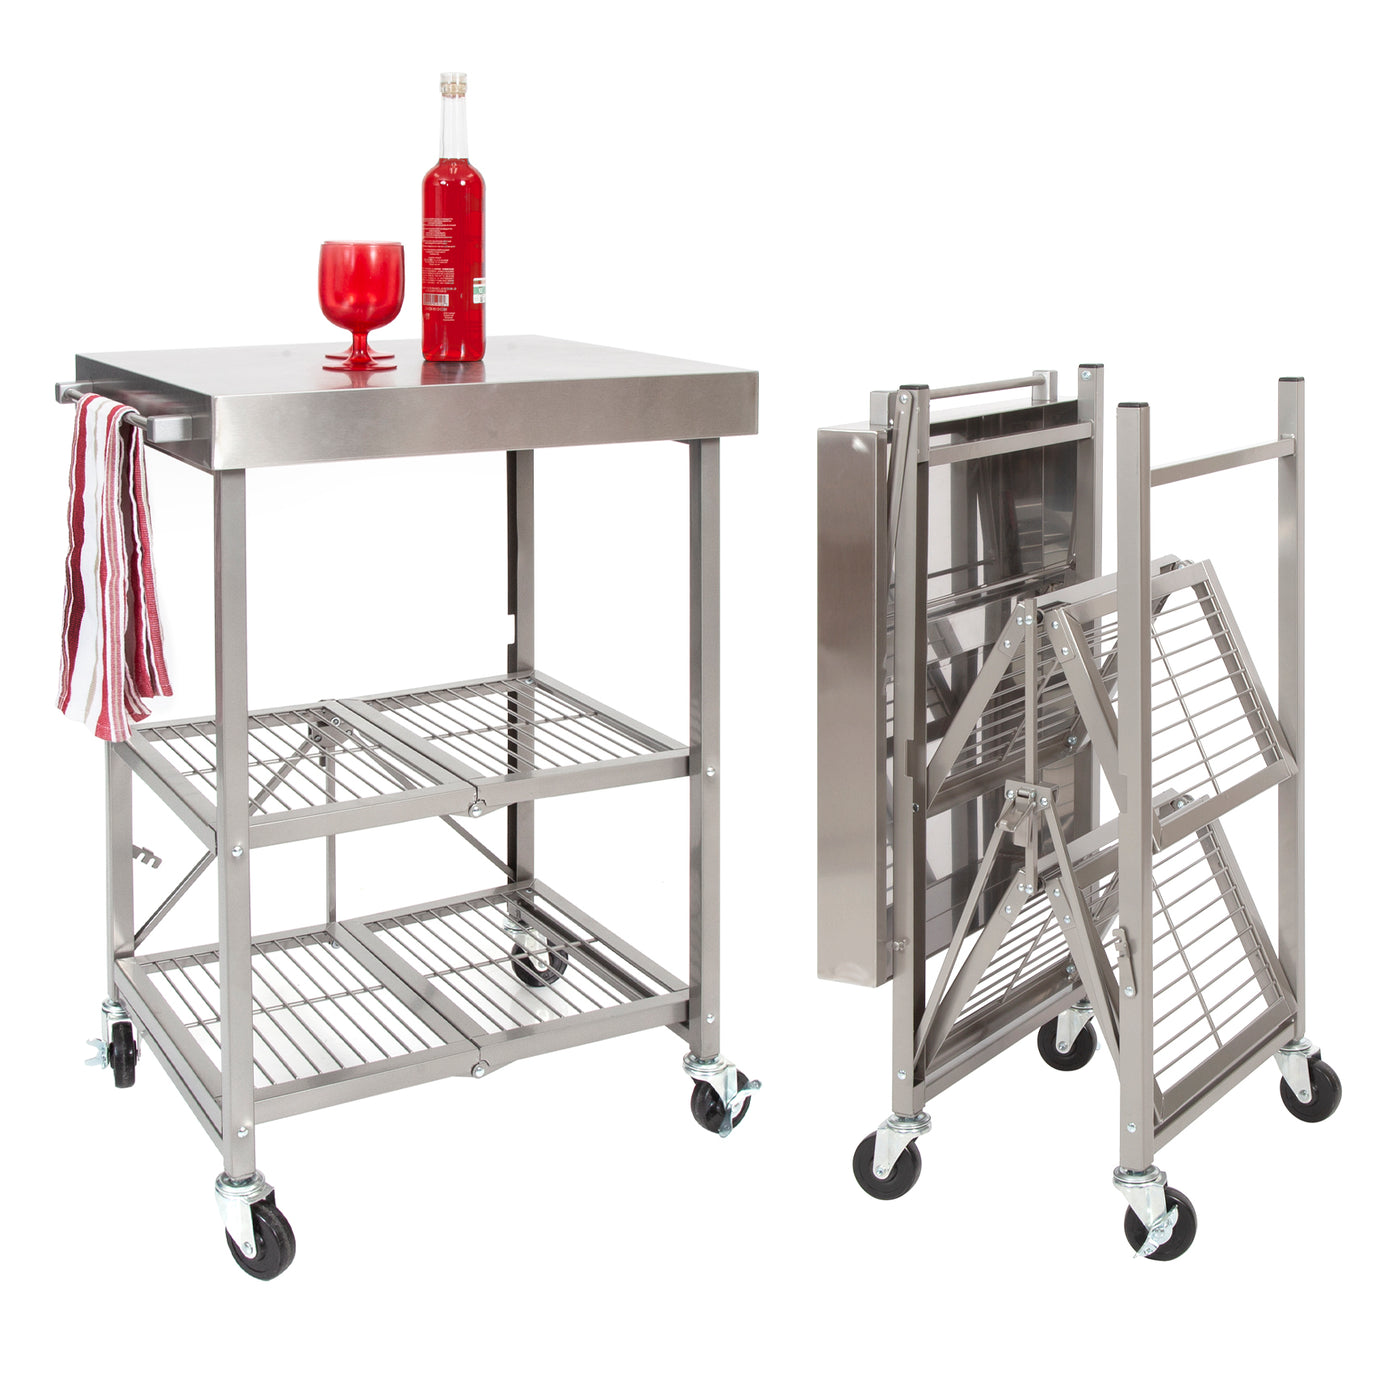 The RBT - Fully Stainless Steel Foldable Kitchen Cart With Wheels